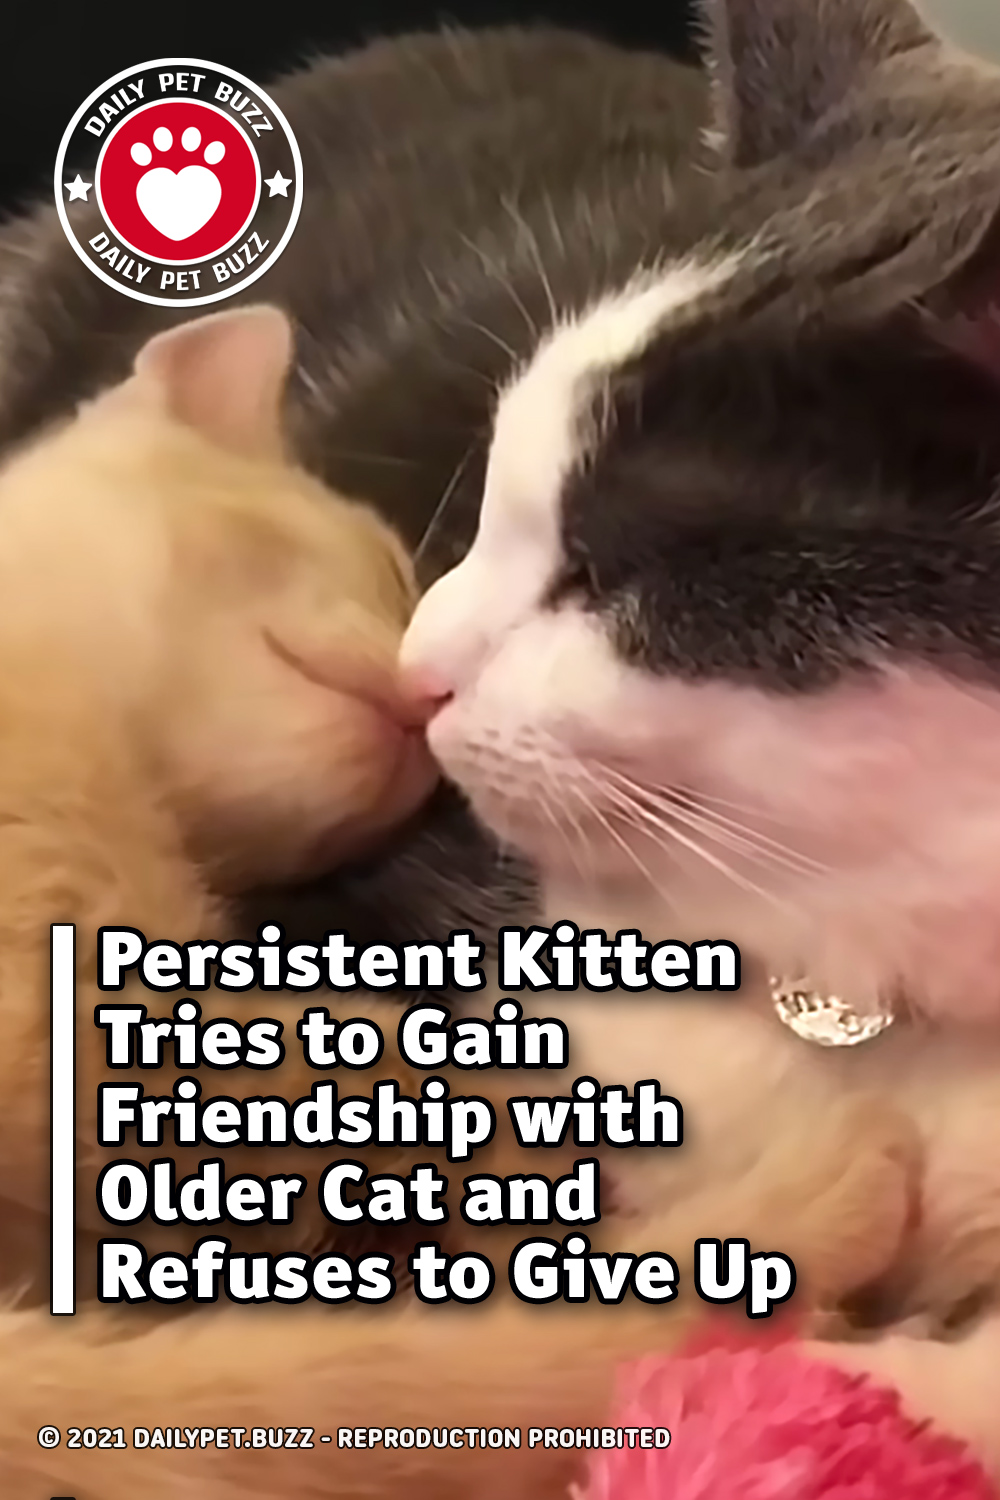 Persistent Kitten Tries to Gain Friendship with Older Cat and Refuses to Give Up